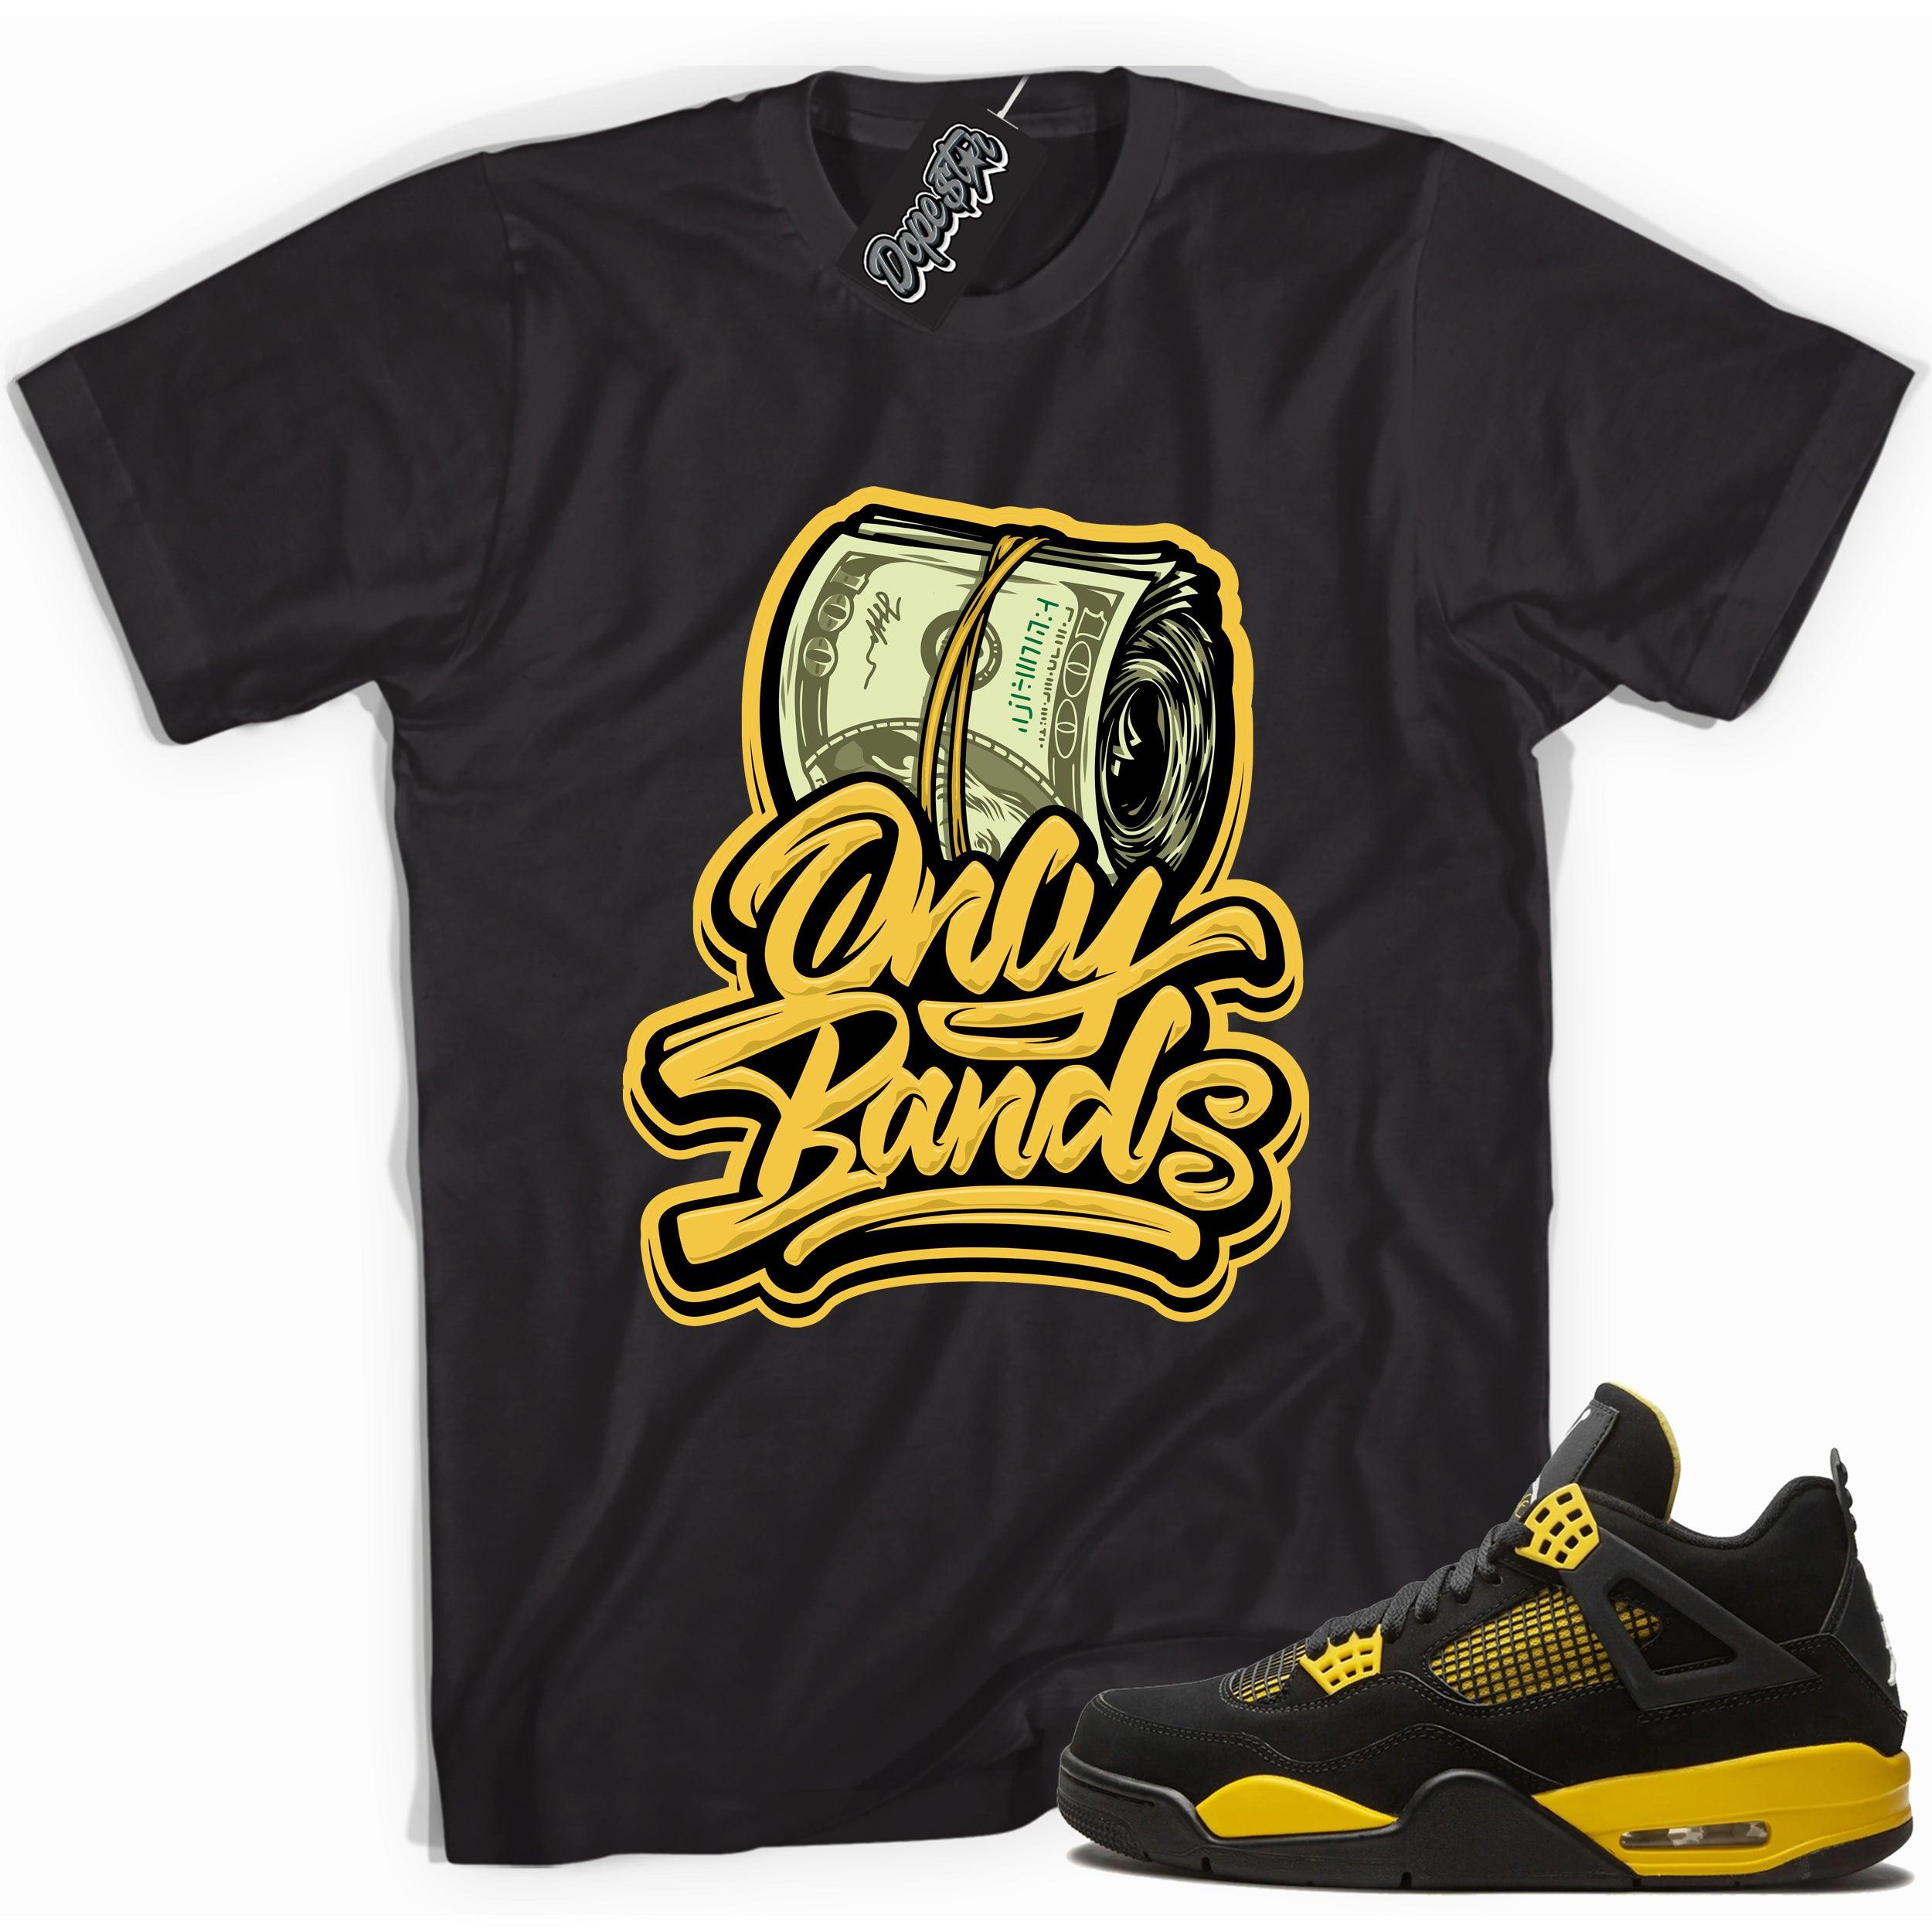 Cool black graphic tee with 'only bands' print, that perfectly matches  Air Jordan 4 Thunder sneakers